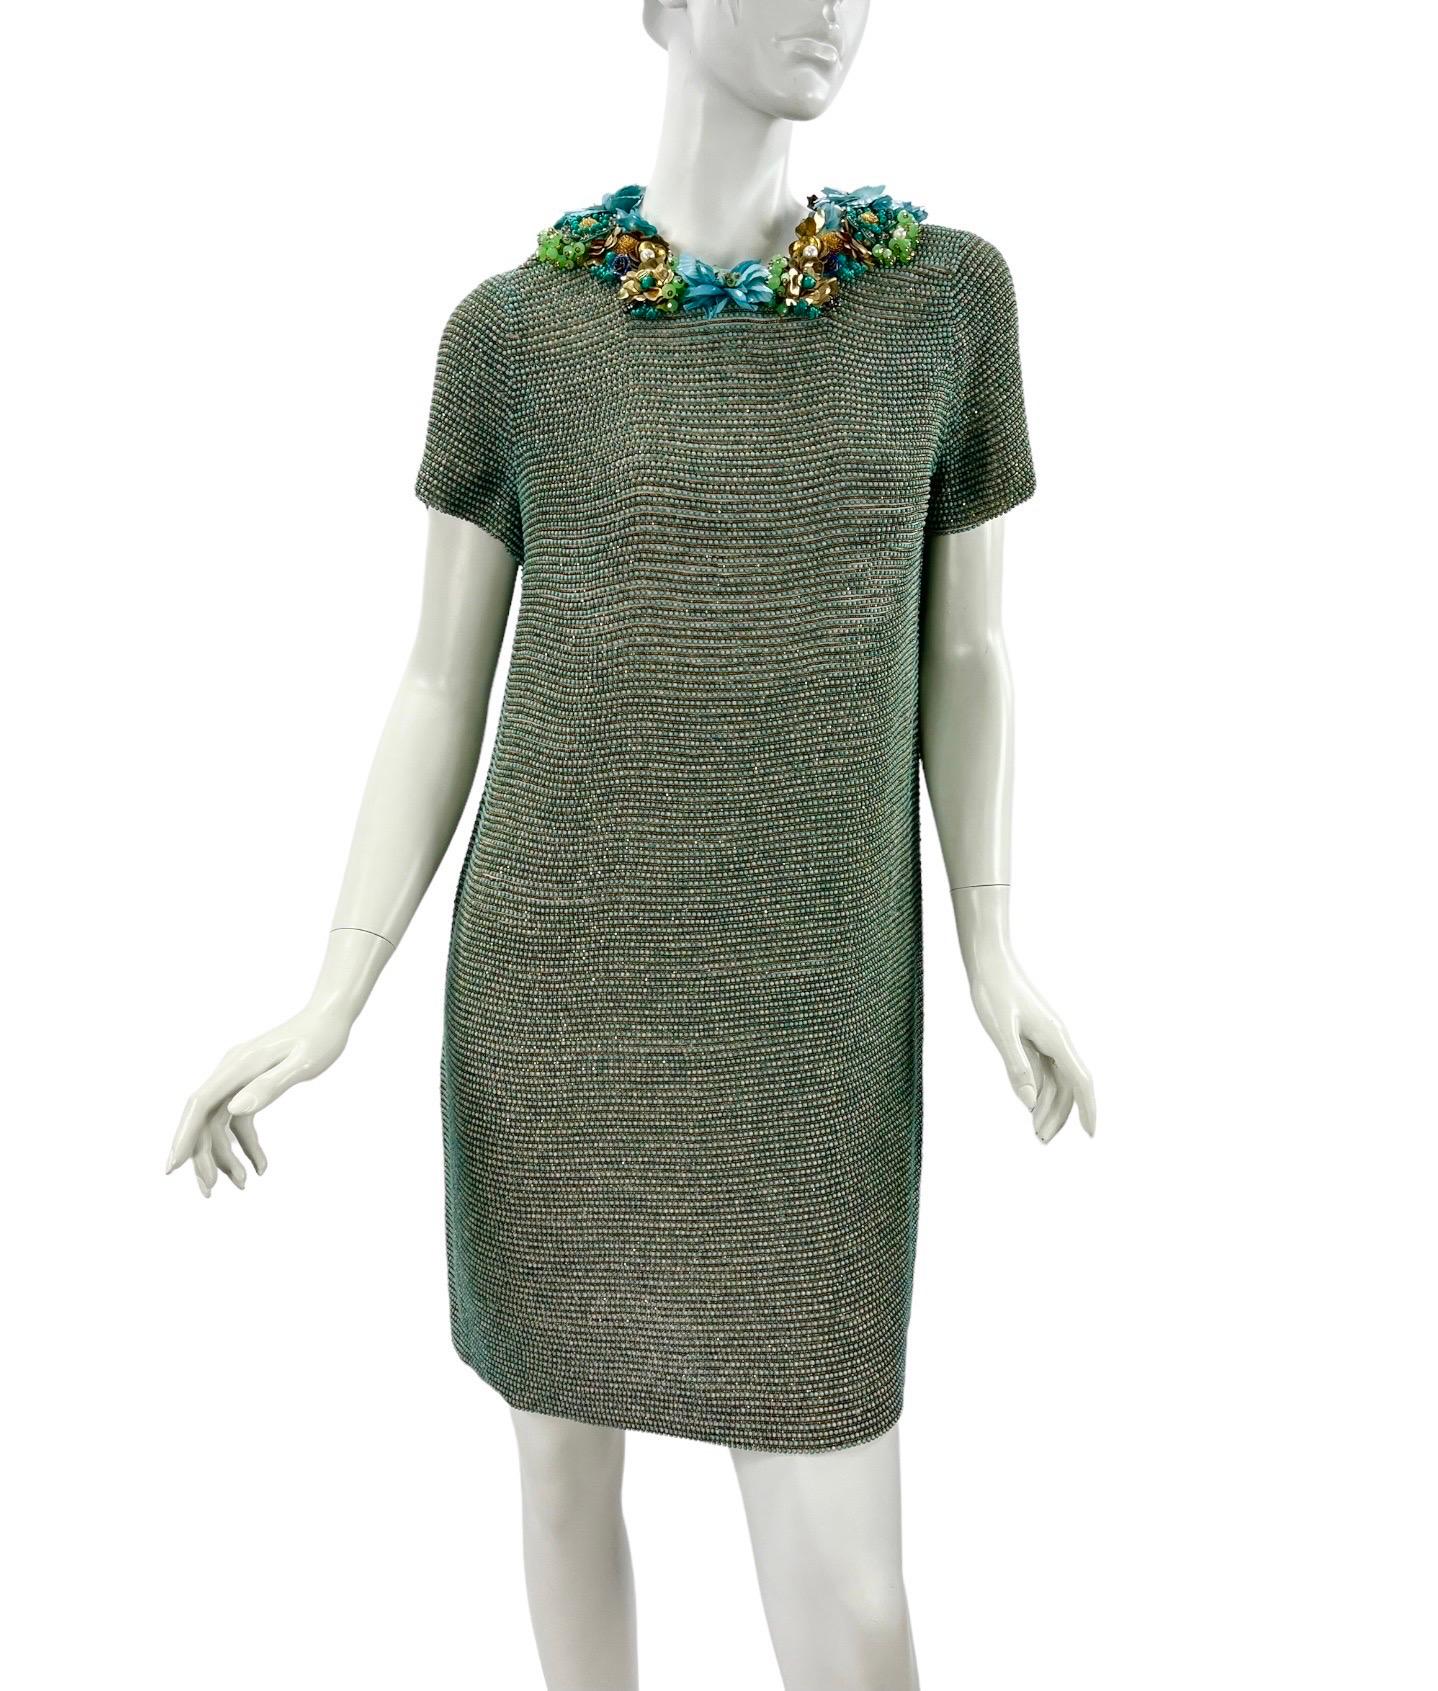 NWT Gucci Fully Beaded and Flower Embellished dress 
Italian size 40 - US 4
Fully beaded with genuine Tibetan turquoise, Lined in 100% Silk.
Measurements: Length - 36 inches, Bust - 36